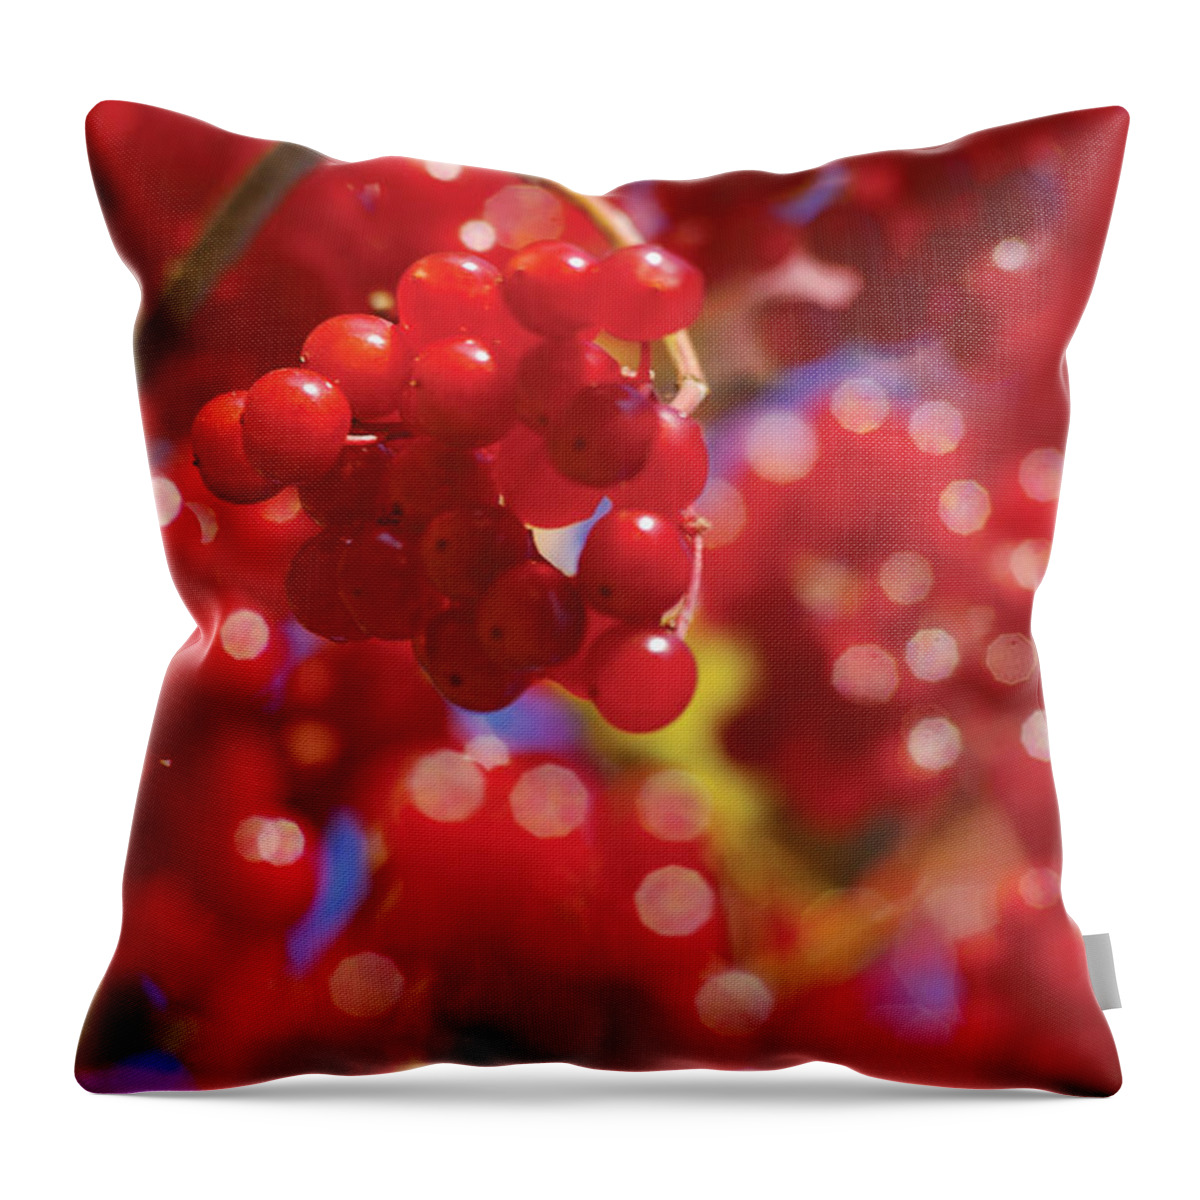 Red Throw Pillow featuring the photograph Berry Berry Red-2 by Steve Somerville